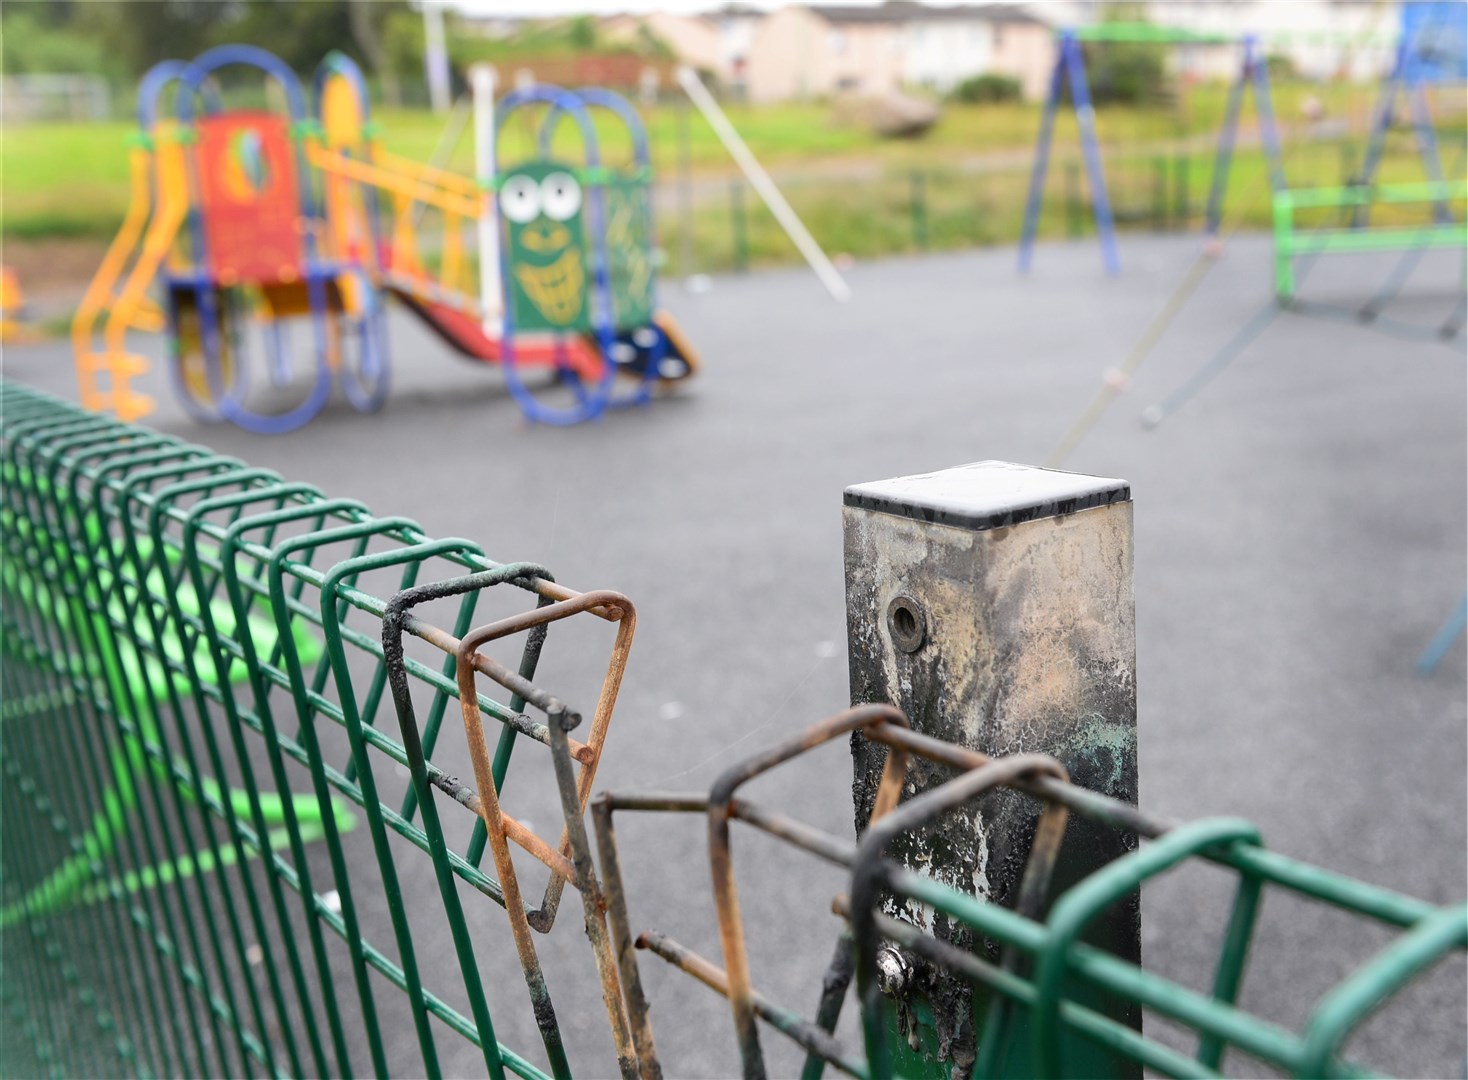 Council play parks have suffered from a lack of investment for many years.